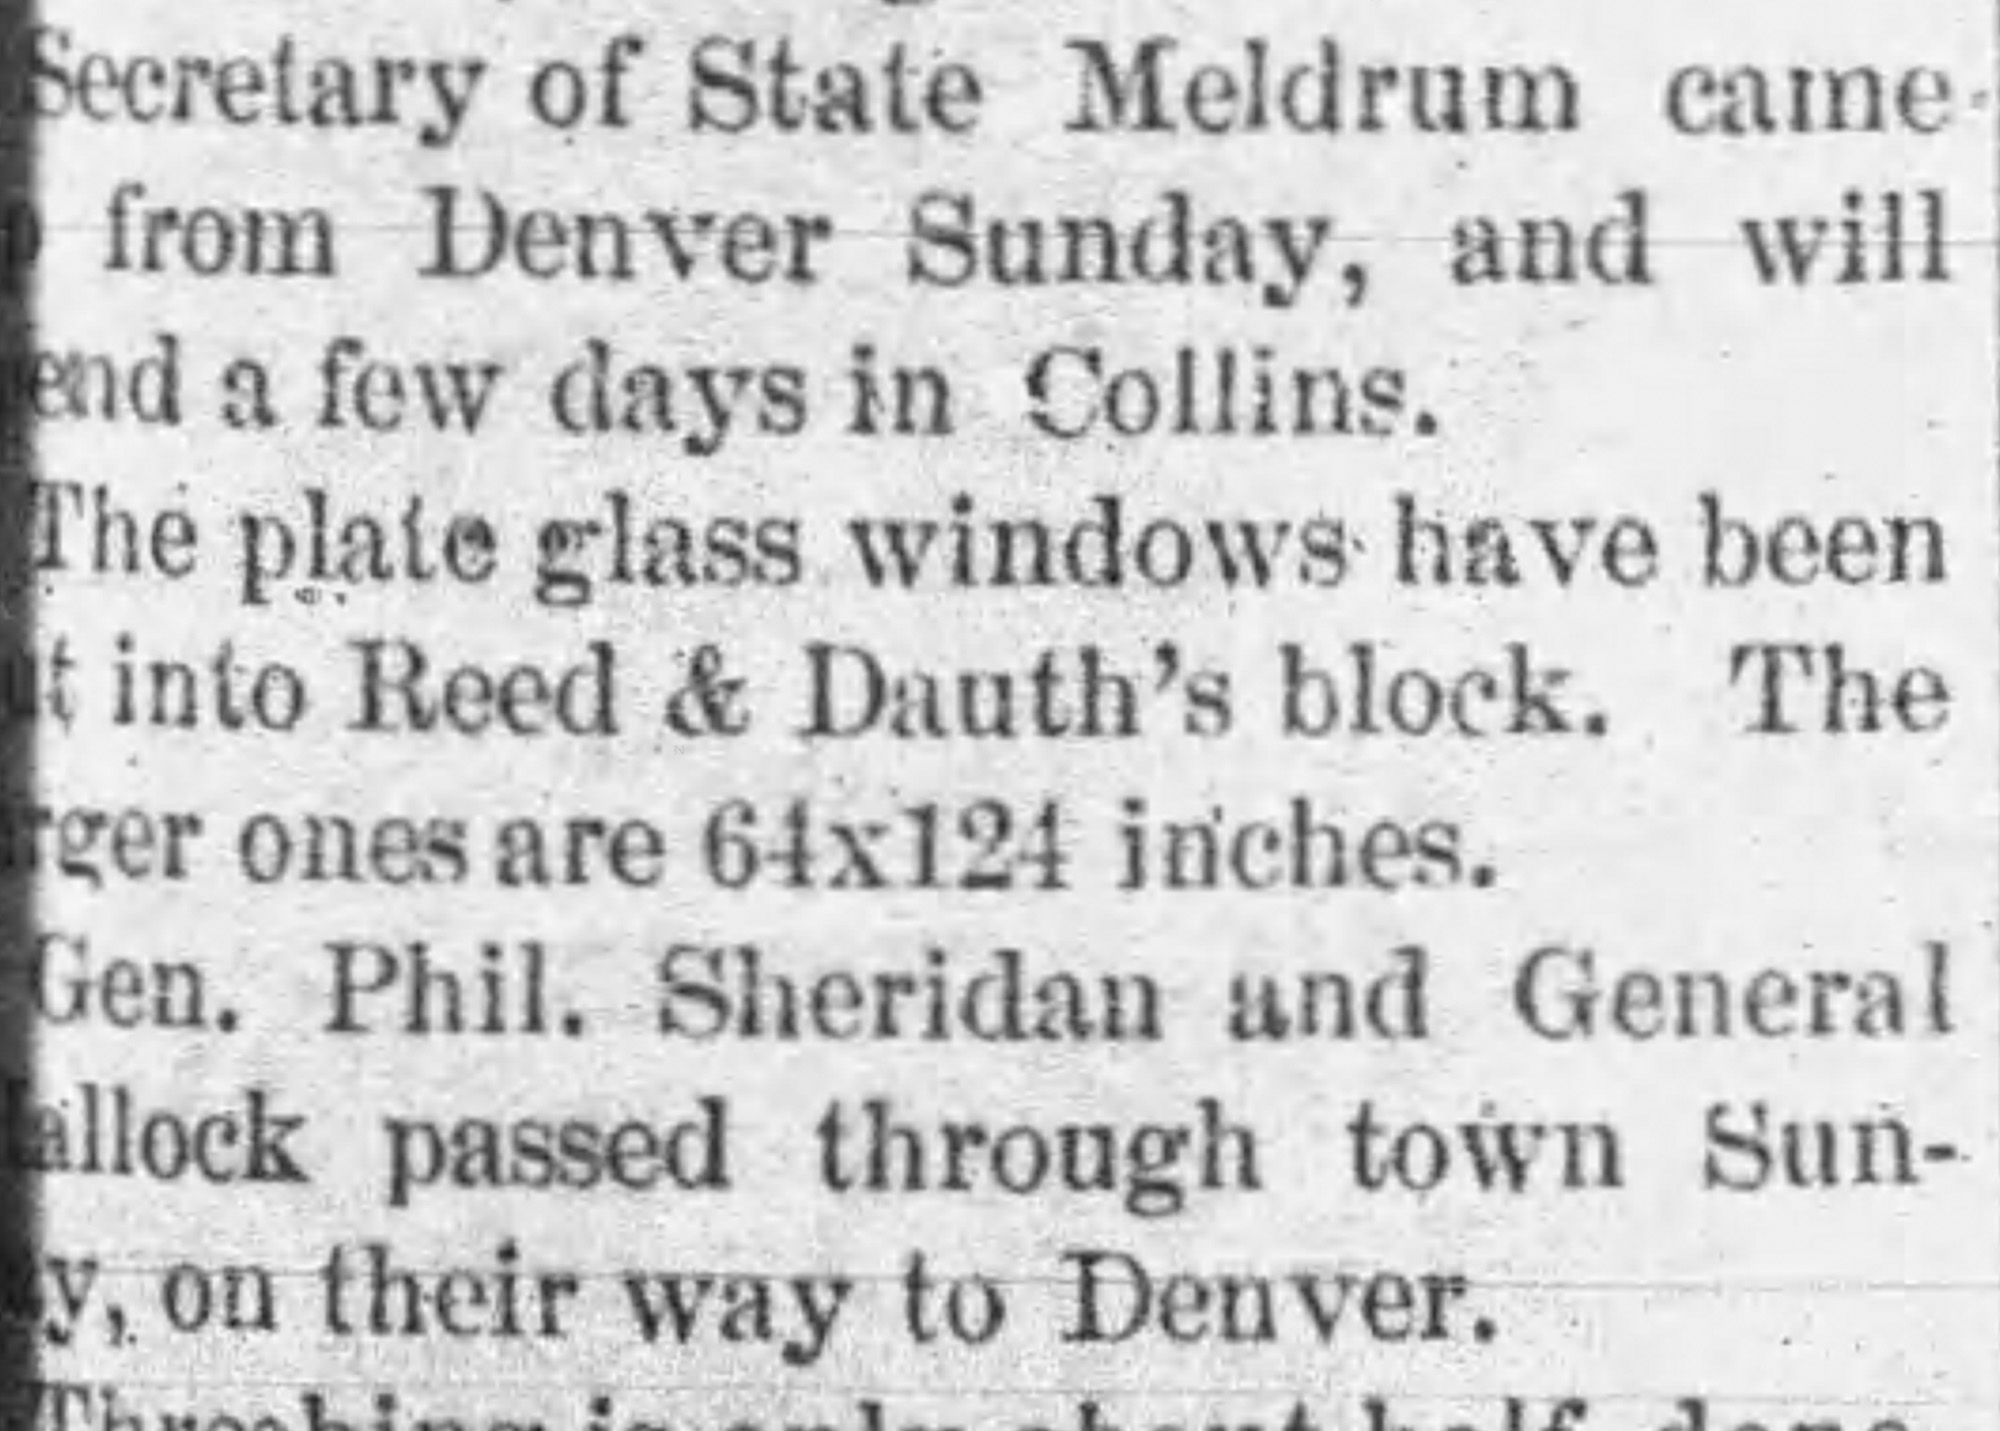 Dauth Family Archive - 1881-09-08 - Express - Louis Dauth Reed-Dauth Block Window Installation